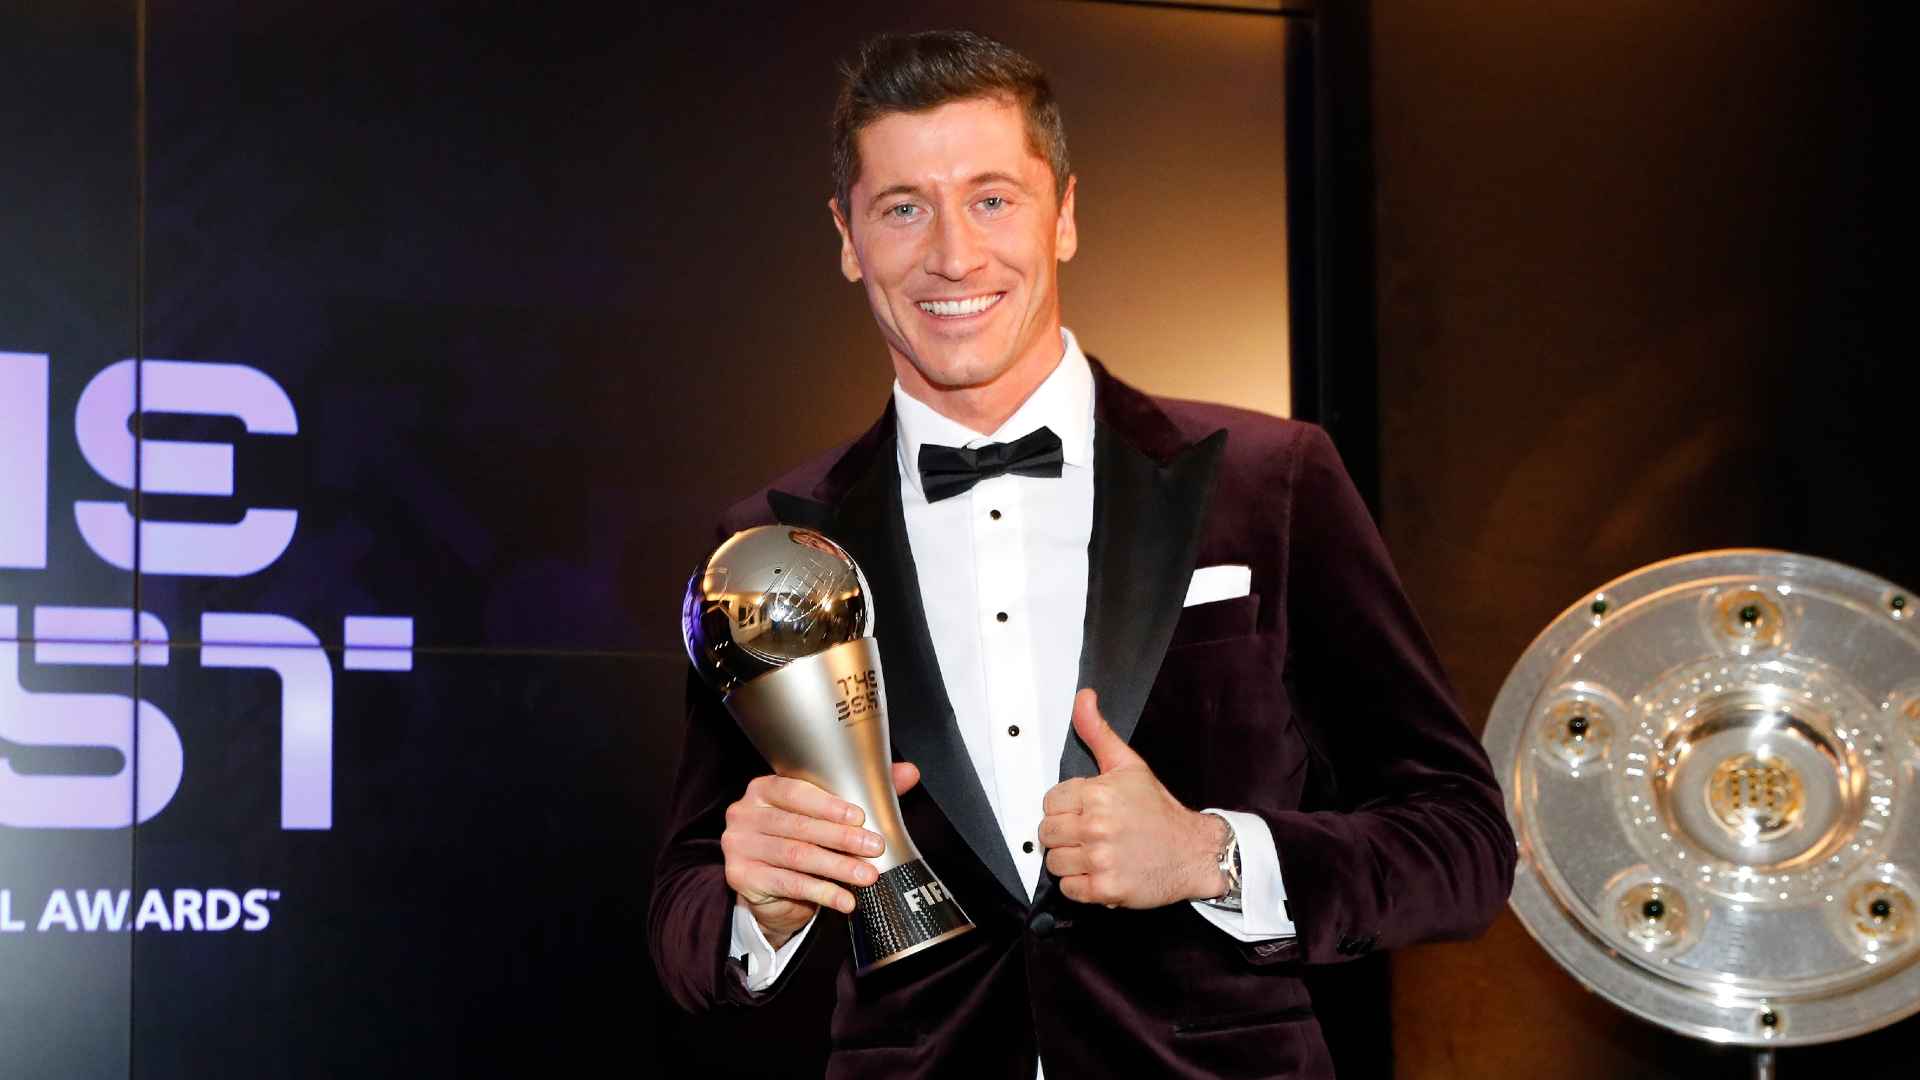 The Best FIFA Football Awards 2022 Date, Time, Venue, Where To Watch